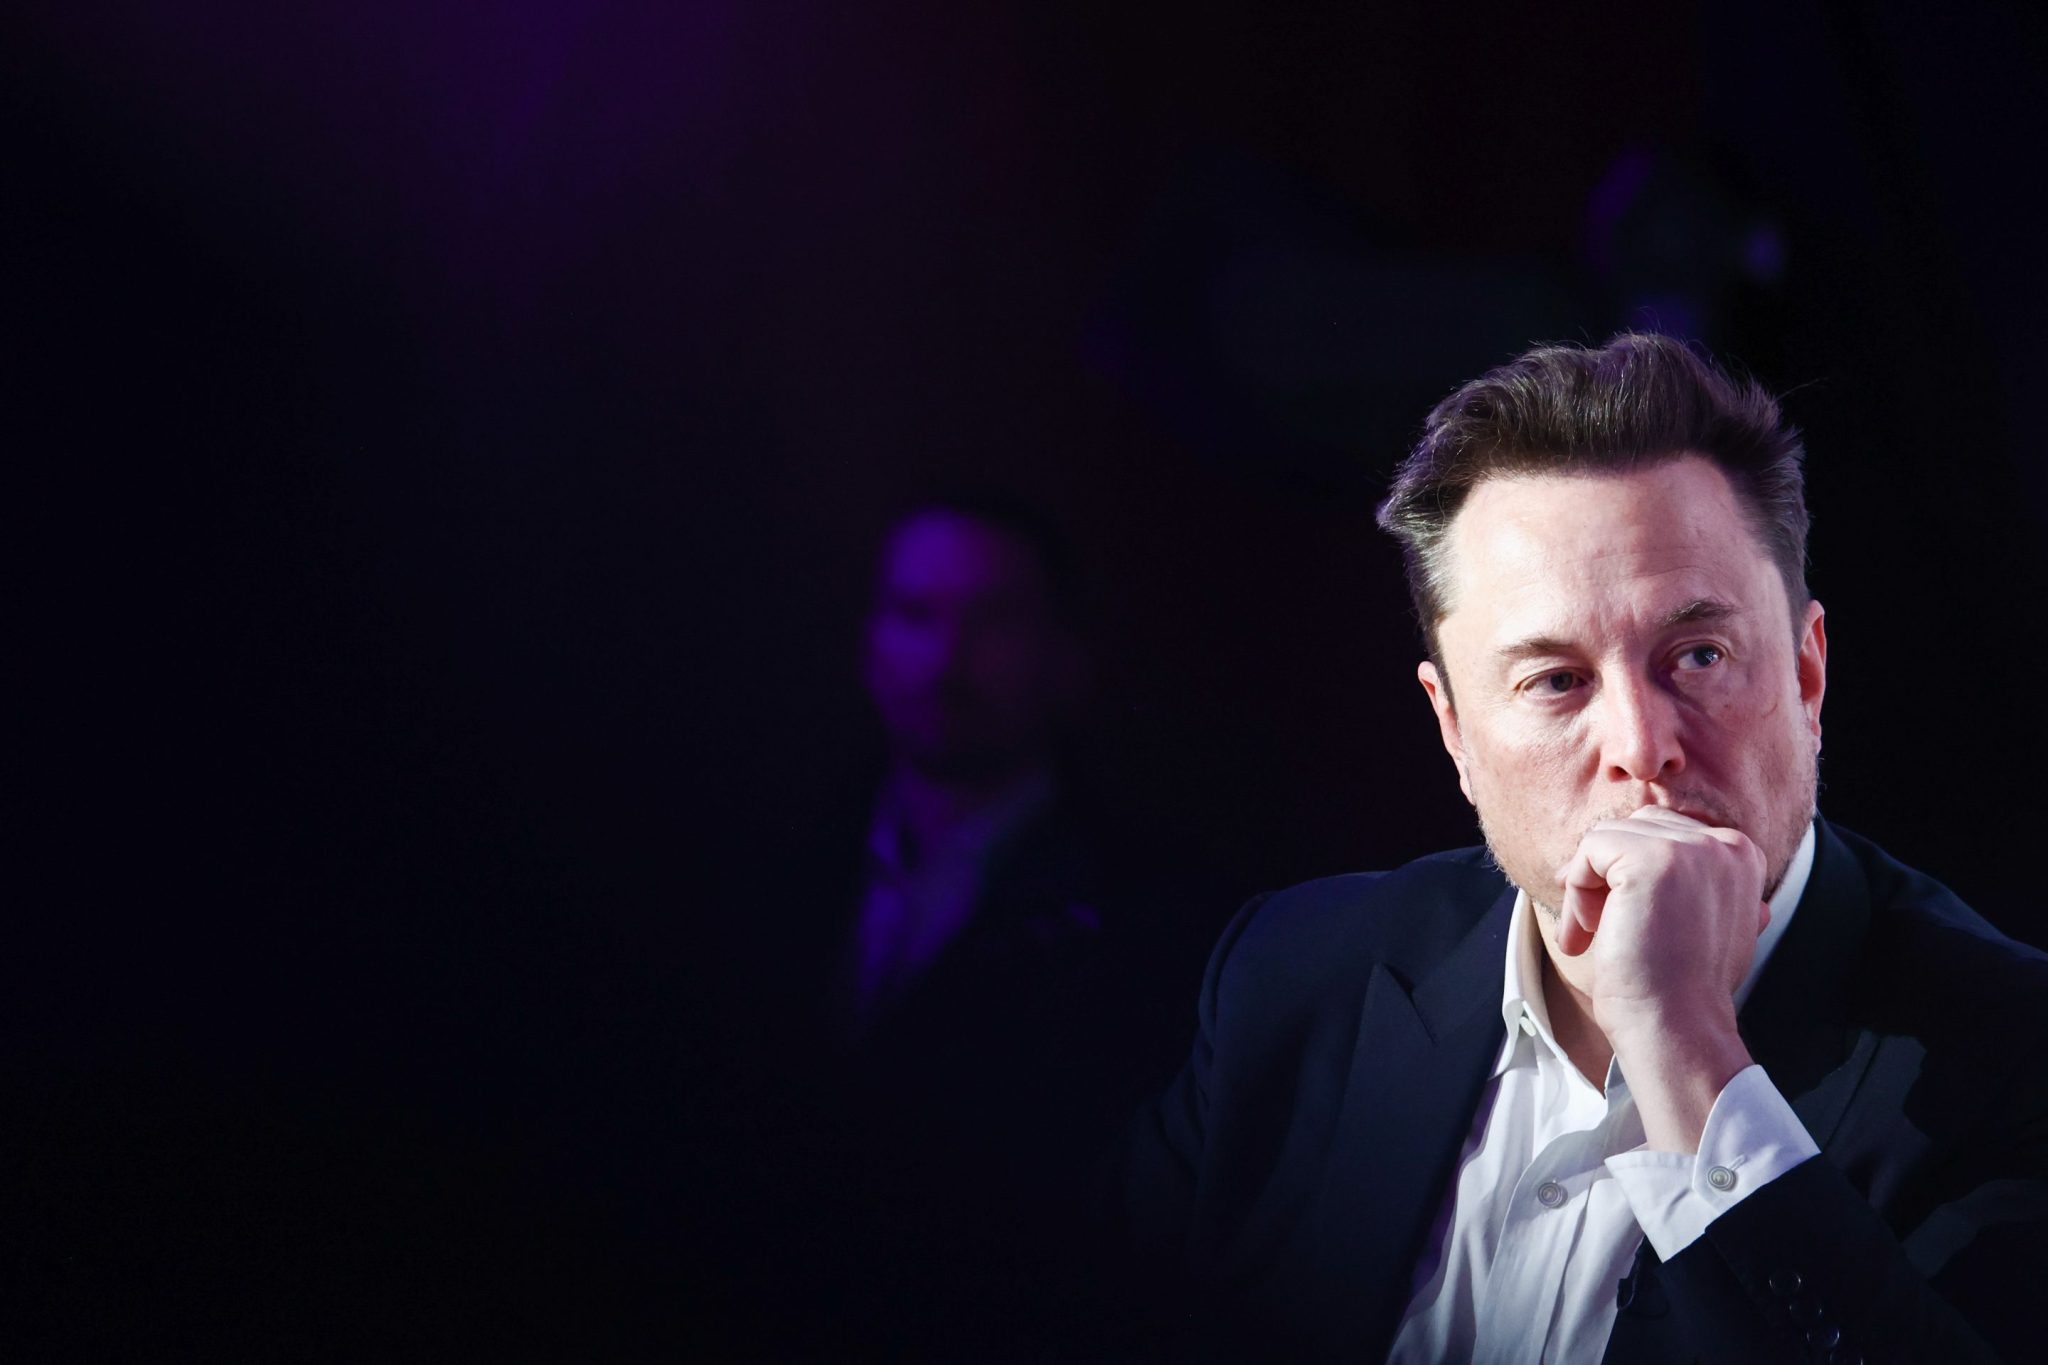 Tesla scraps Elon Musk’s no-advertising mantra as stock nosedives nearly 30% this year